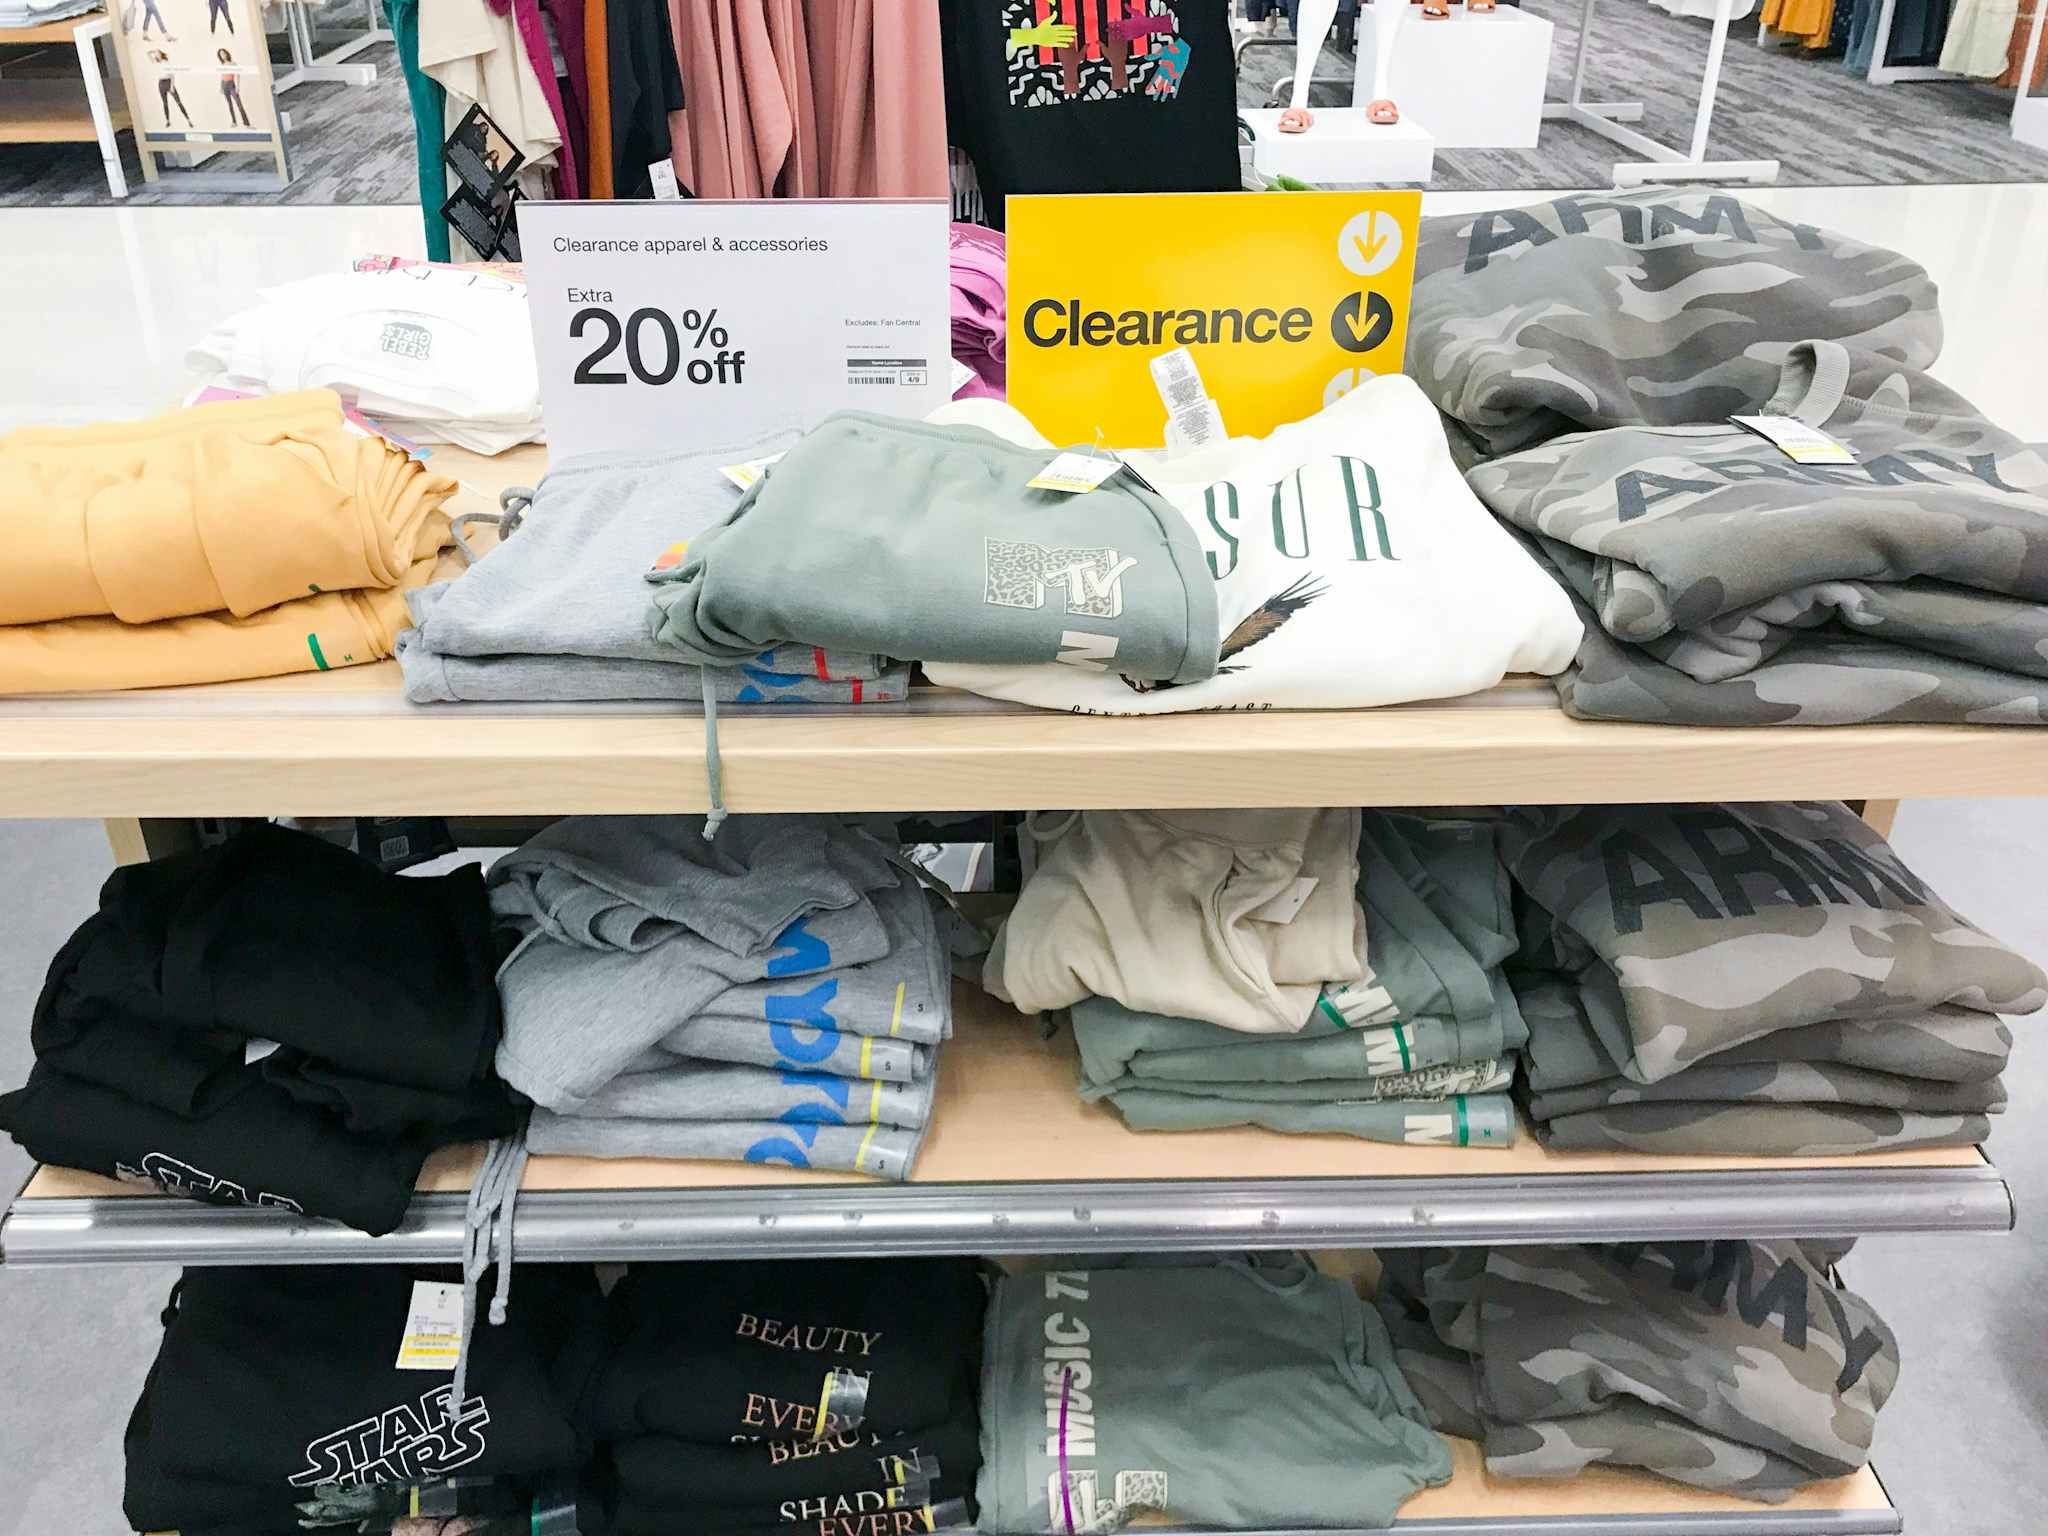 Target clothing sale: Save 30% on women's jeans, tees and more